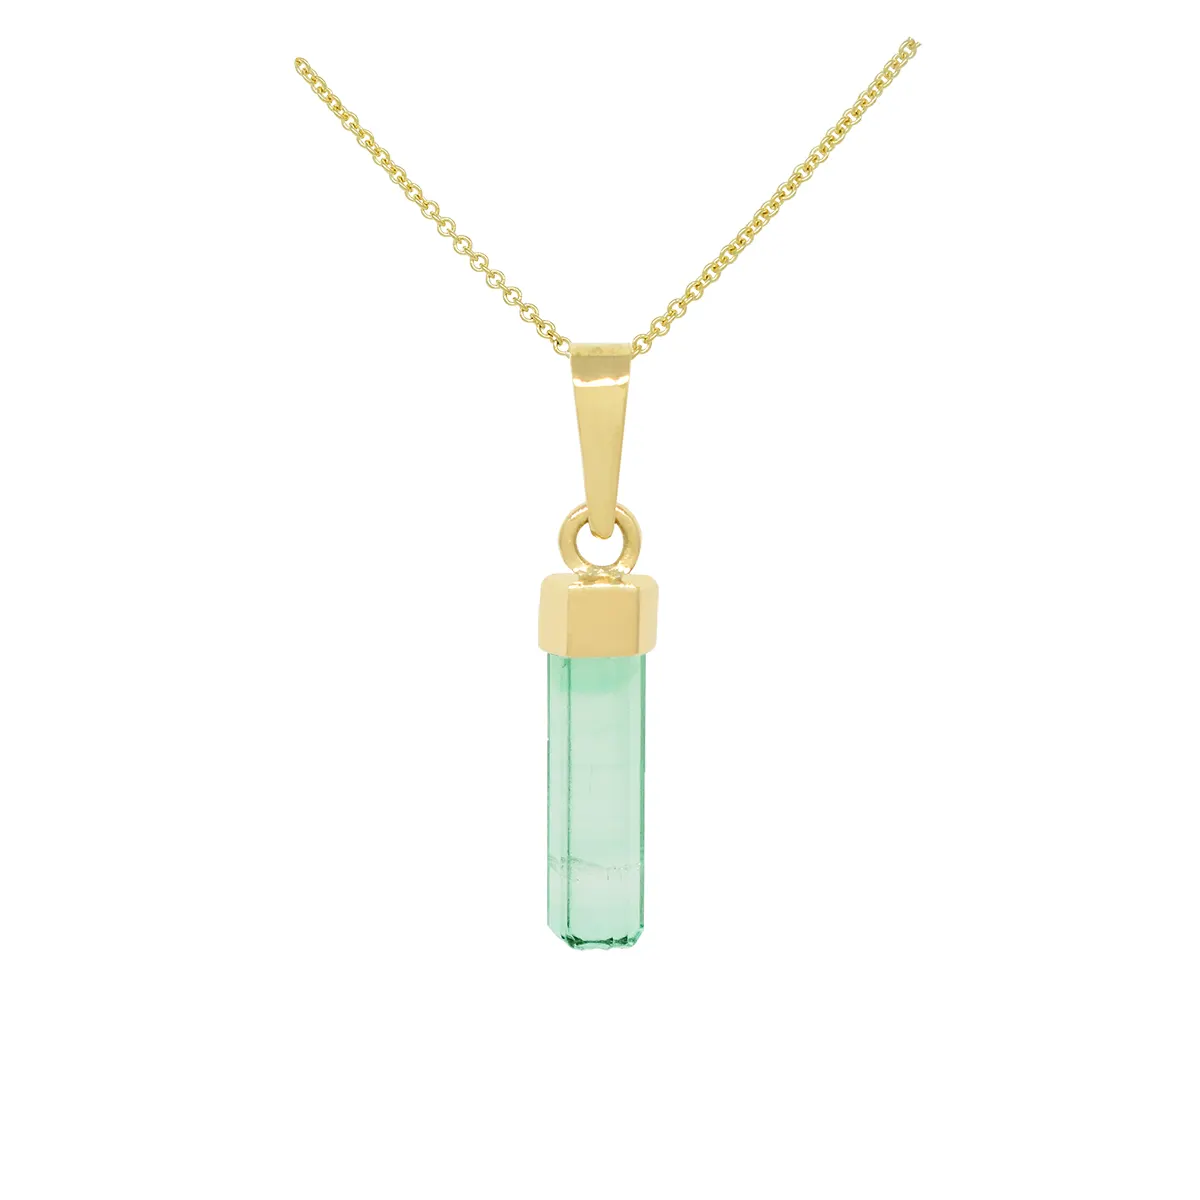 Raw 2.15 Ct. Uncut Natural Colombian Emerald in 18K Gold Pendant